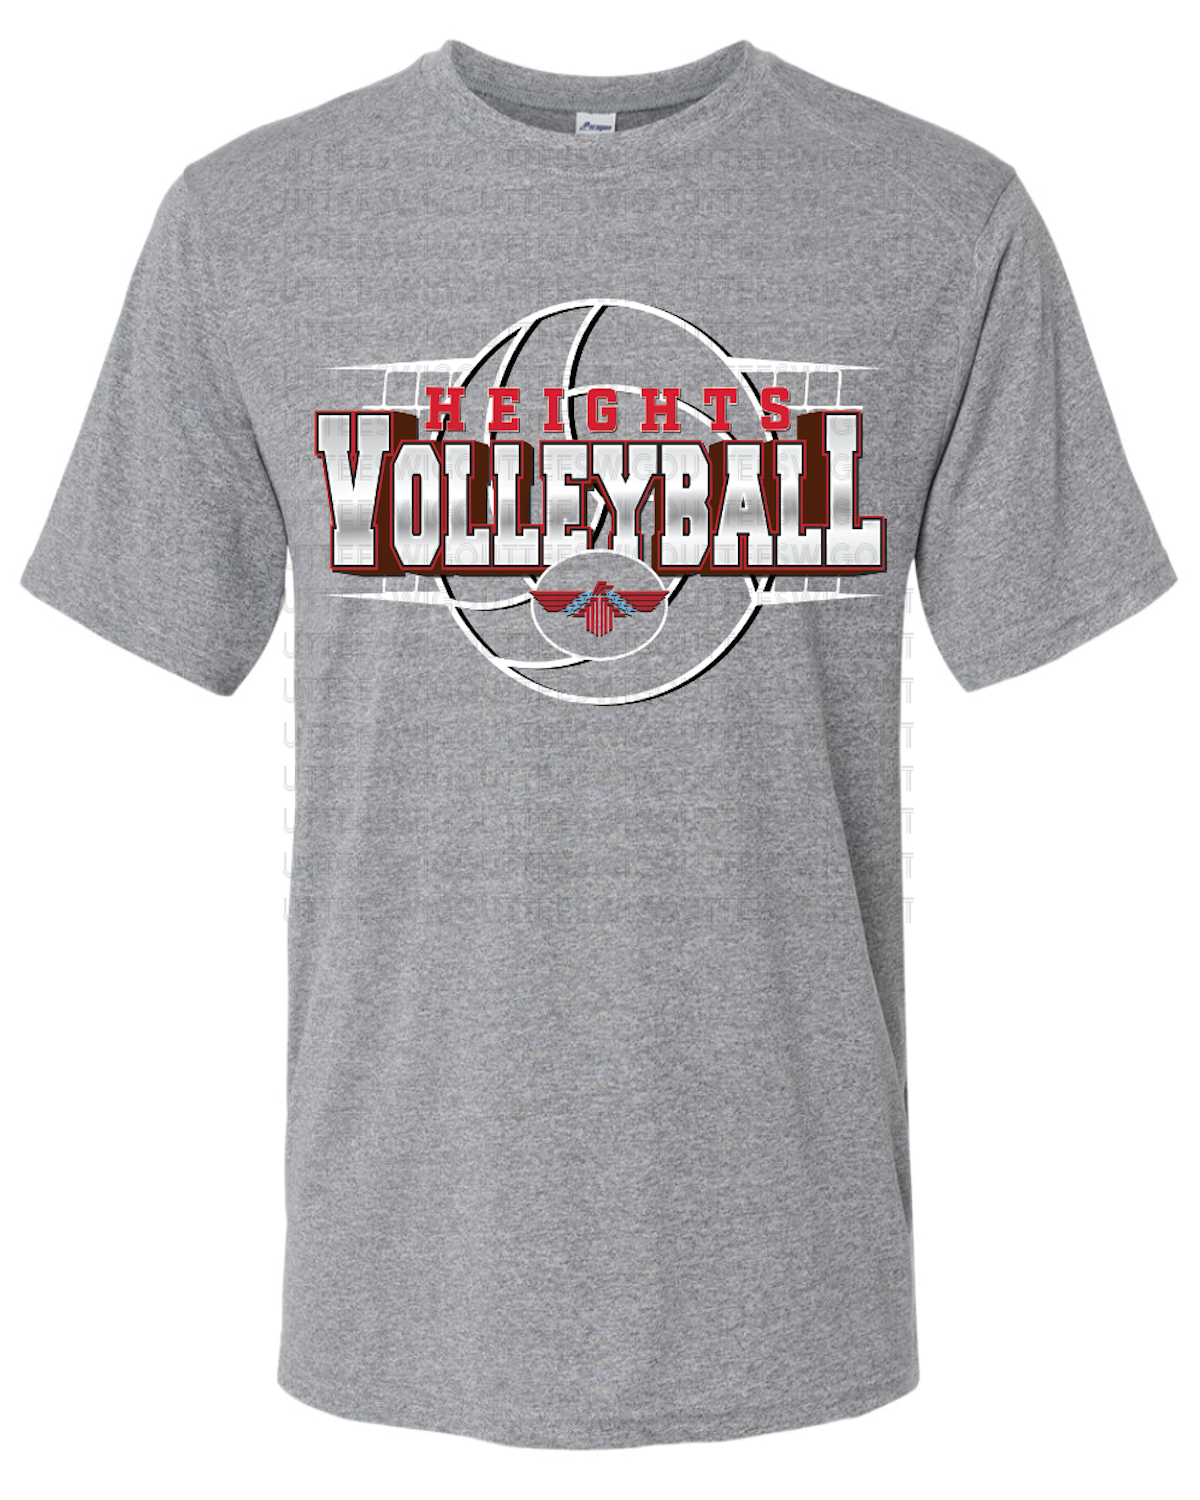 Heights Volleyball Paragon Performance T-shirt